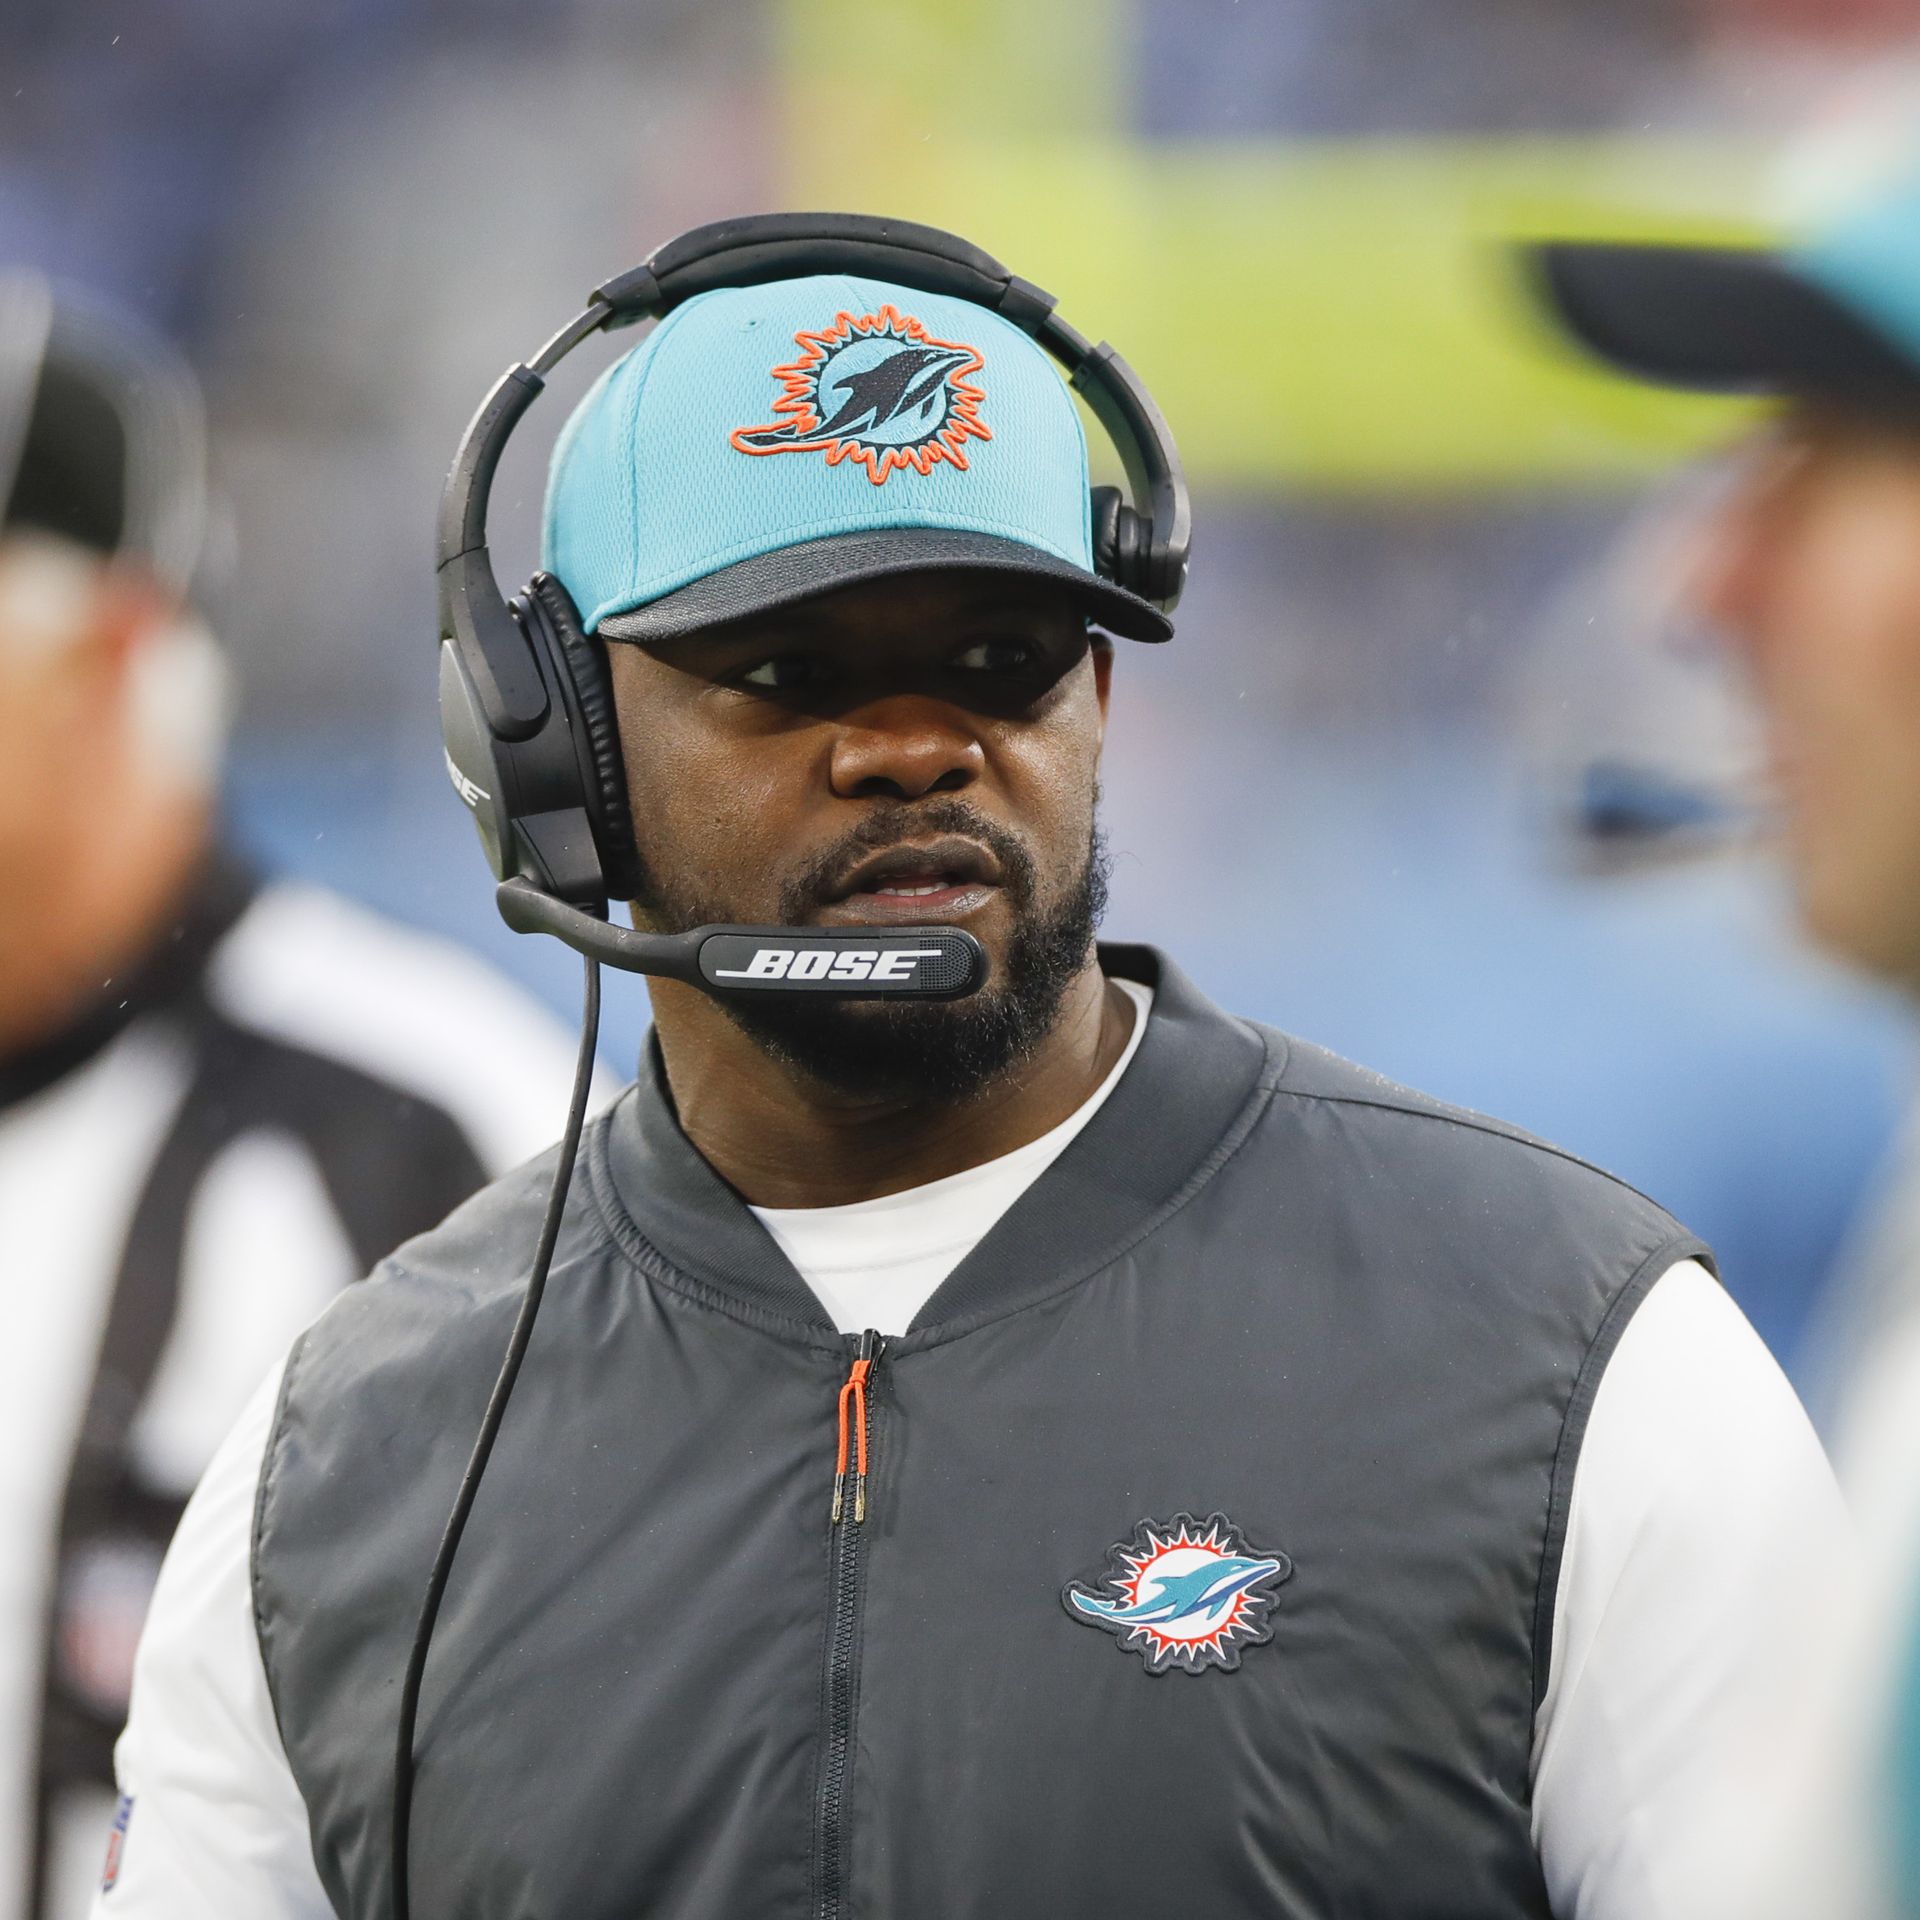 Former Miami Dolphins head coach sues NFL for racial discrimination